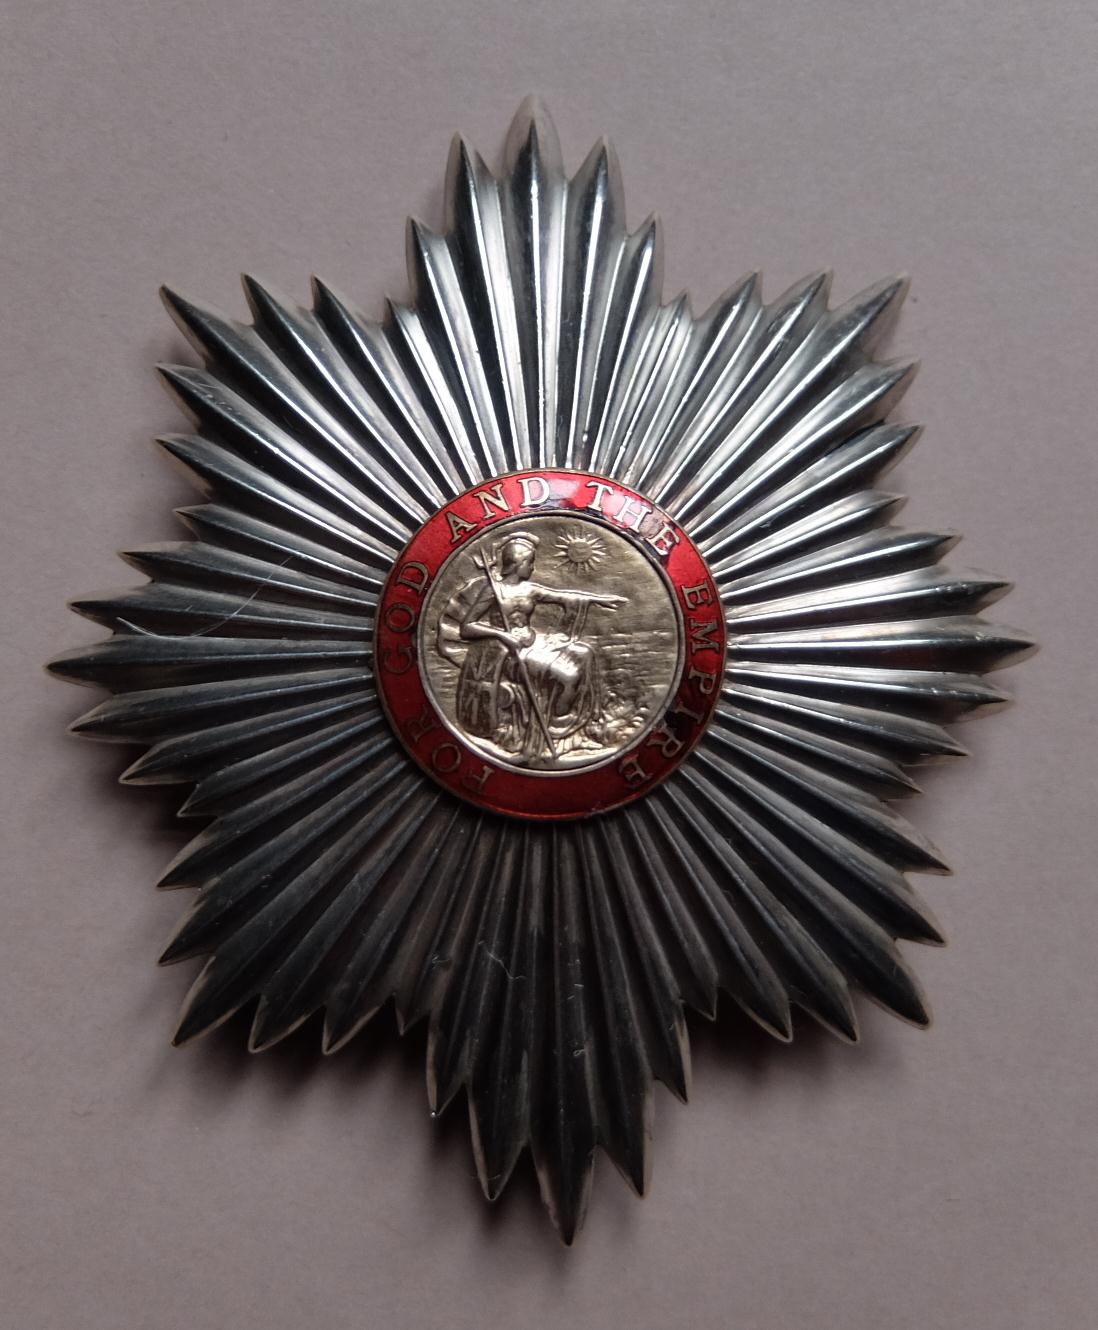 Order of the British Empire star